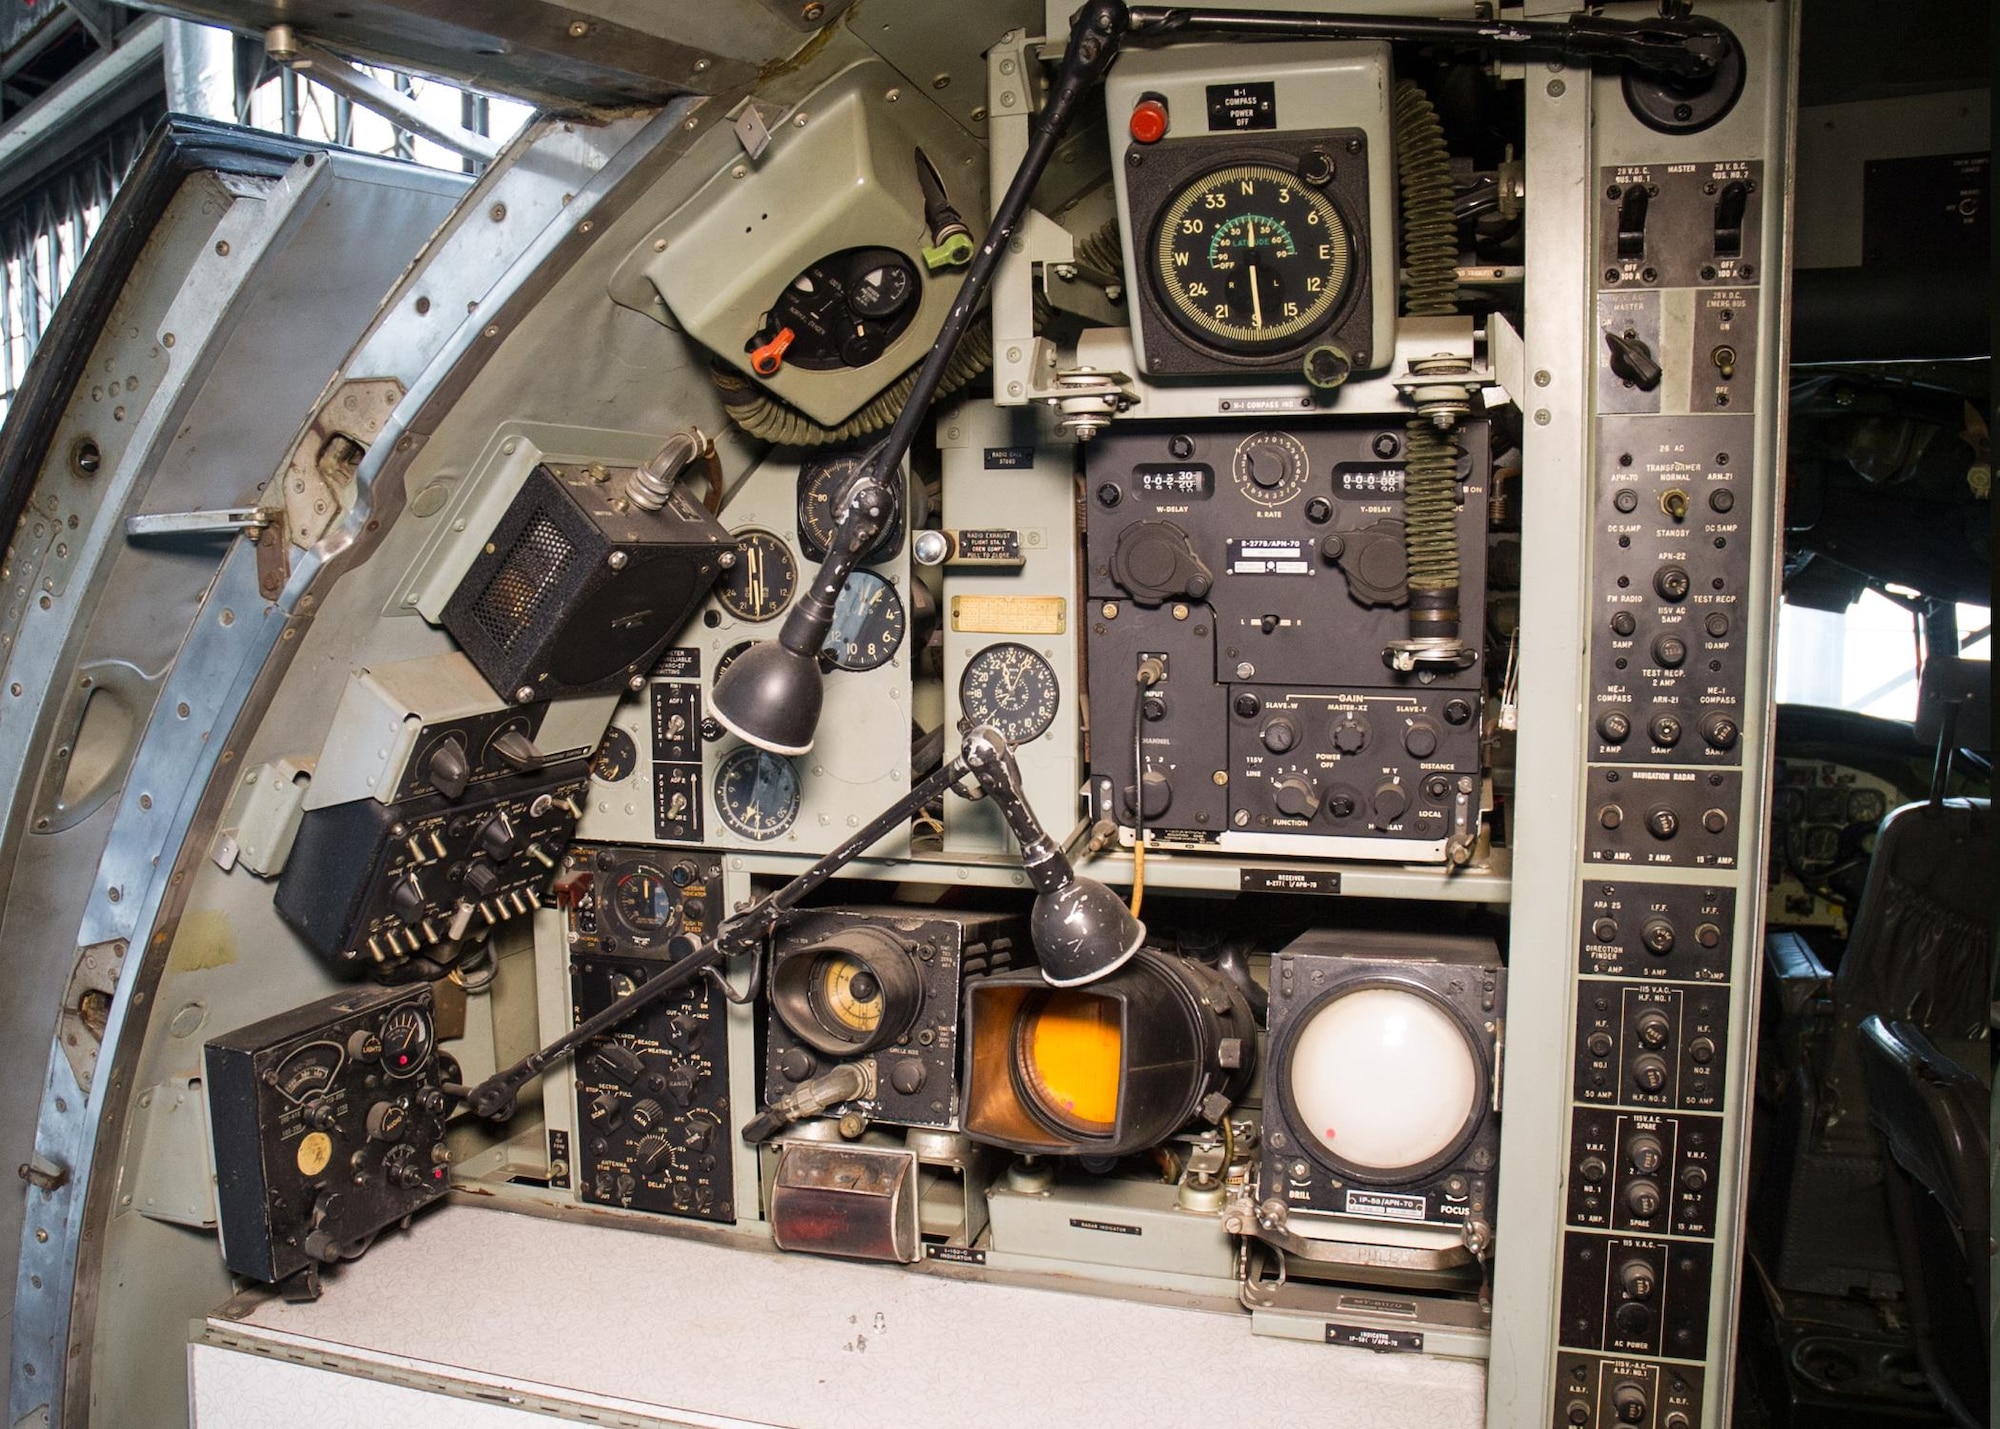 DAYTON, Ohio -- Lockheed VC-121E "Columbine III" flight deck view at the National Museum of the United States Air Force. (U.S. Air Force photo)